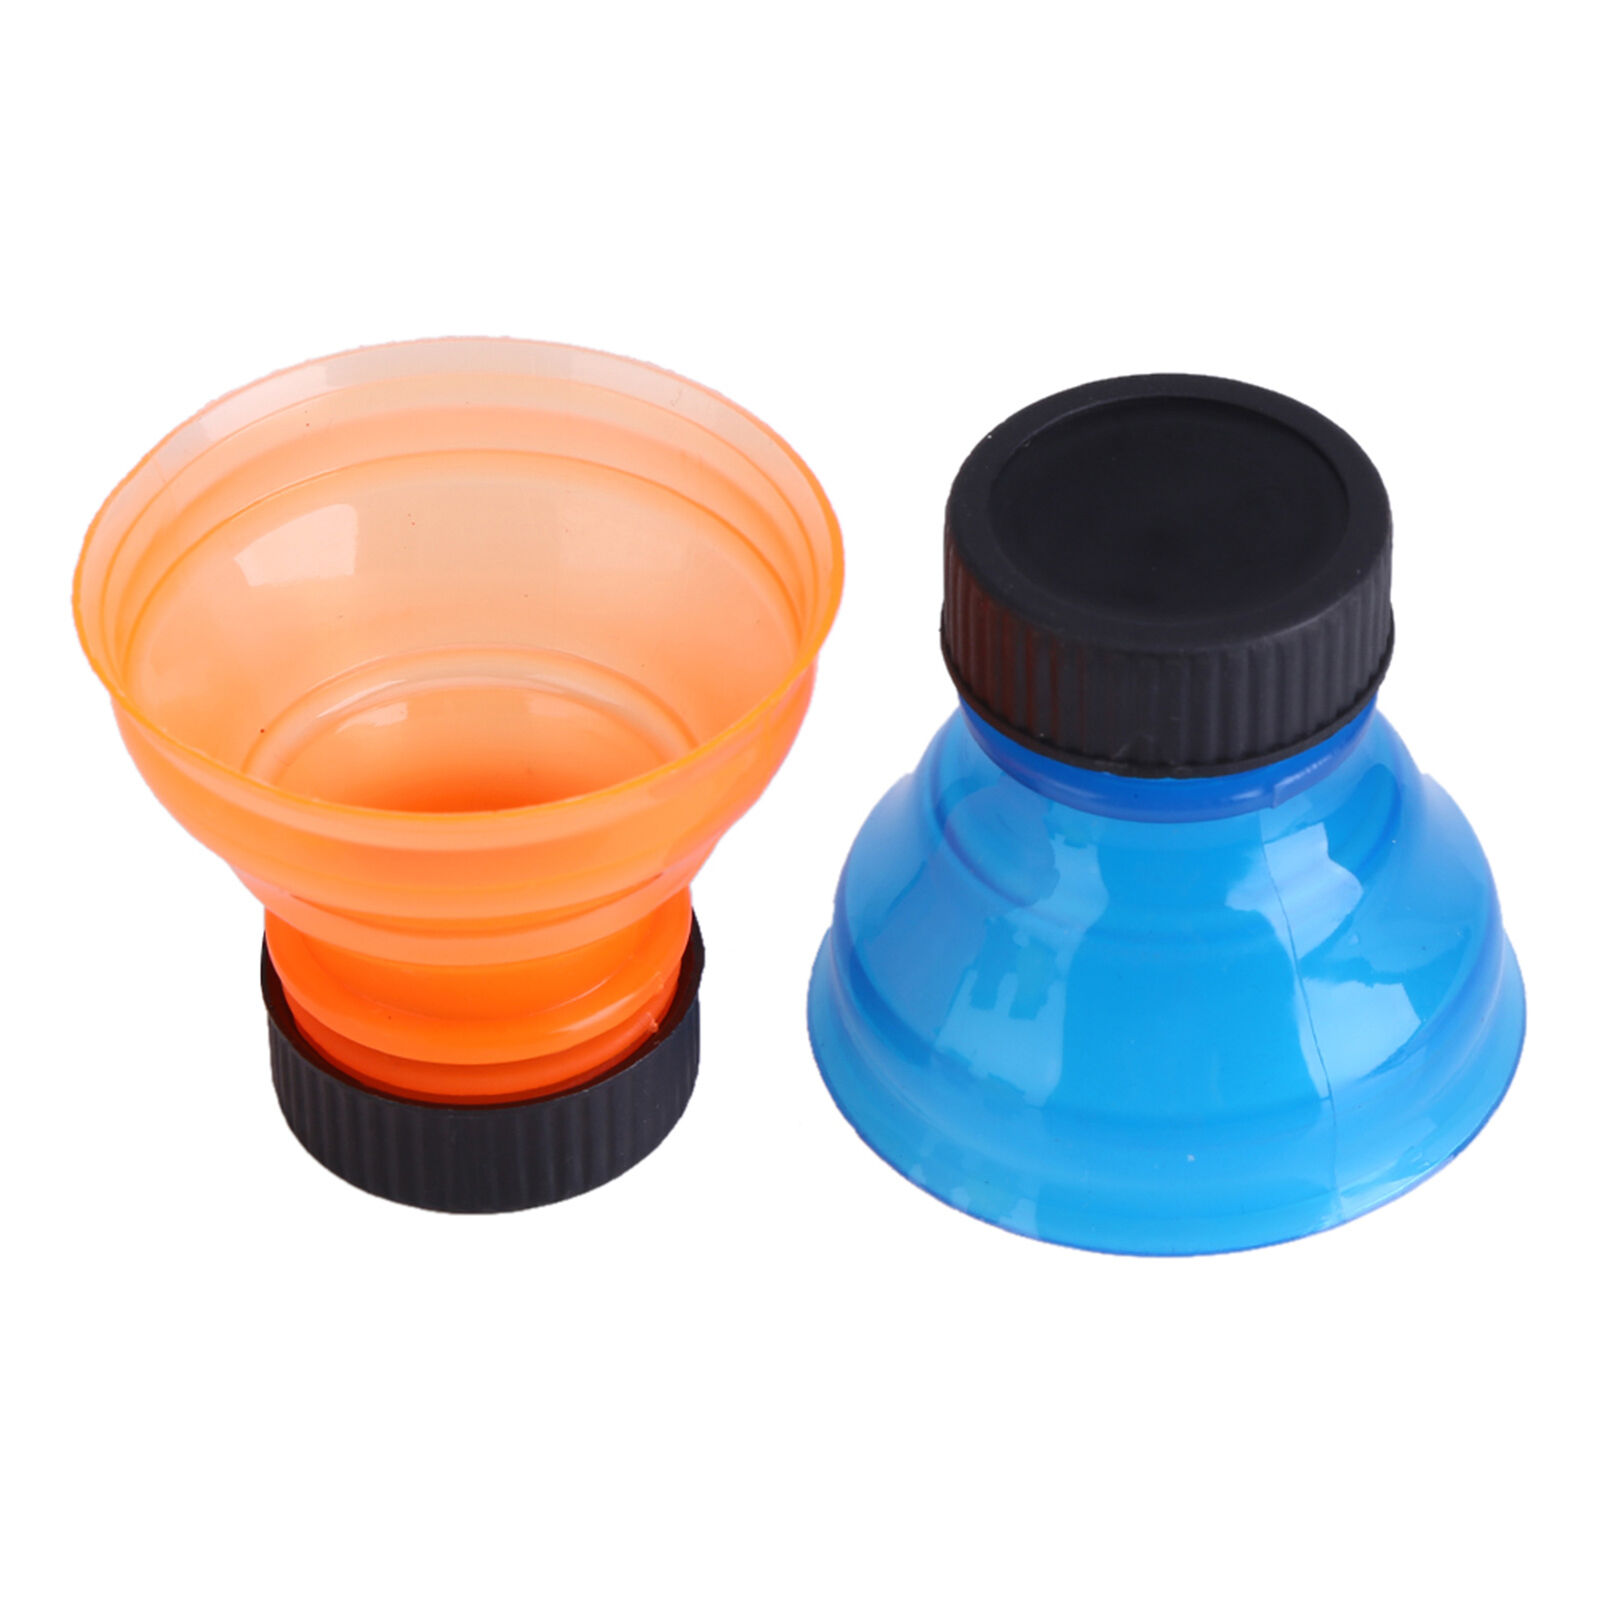 6Pcs Bottle Caps Reusable Bottle Caps For Cool Soda Drink Drink Unbranded Does not apply - фотография #20